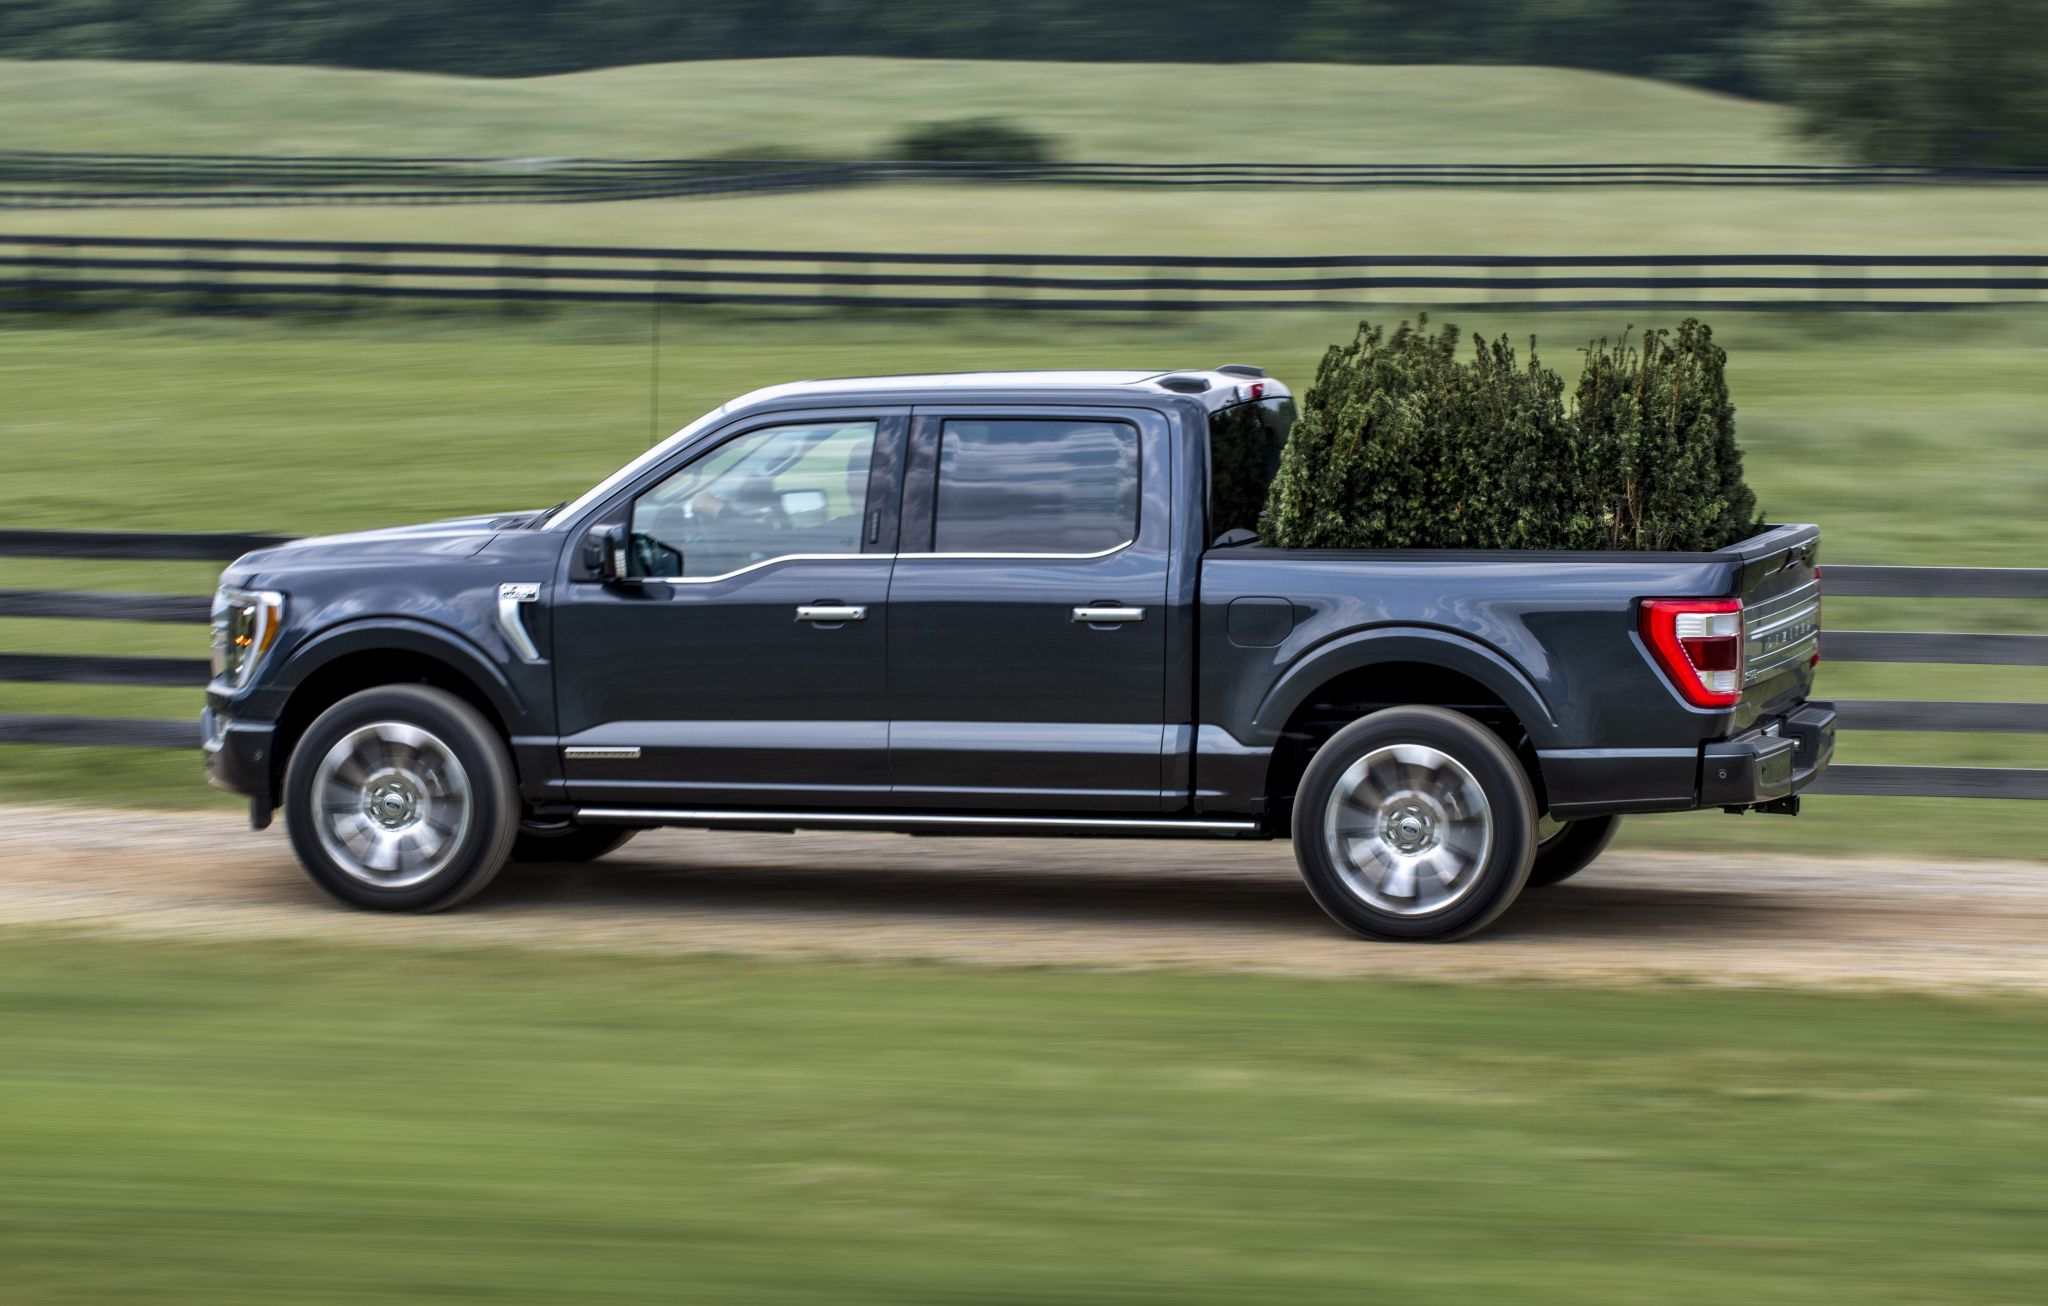 Ford S 2021 F 150 Lineup Includes A Hybrid Houston Chronicle